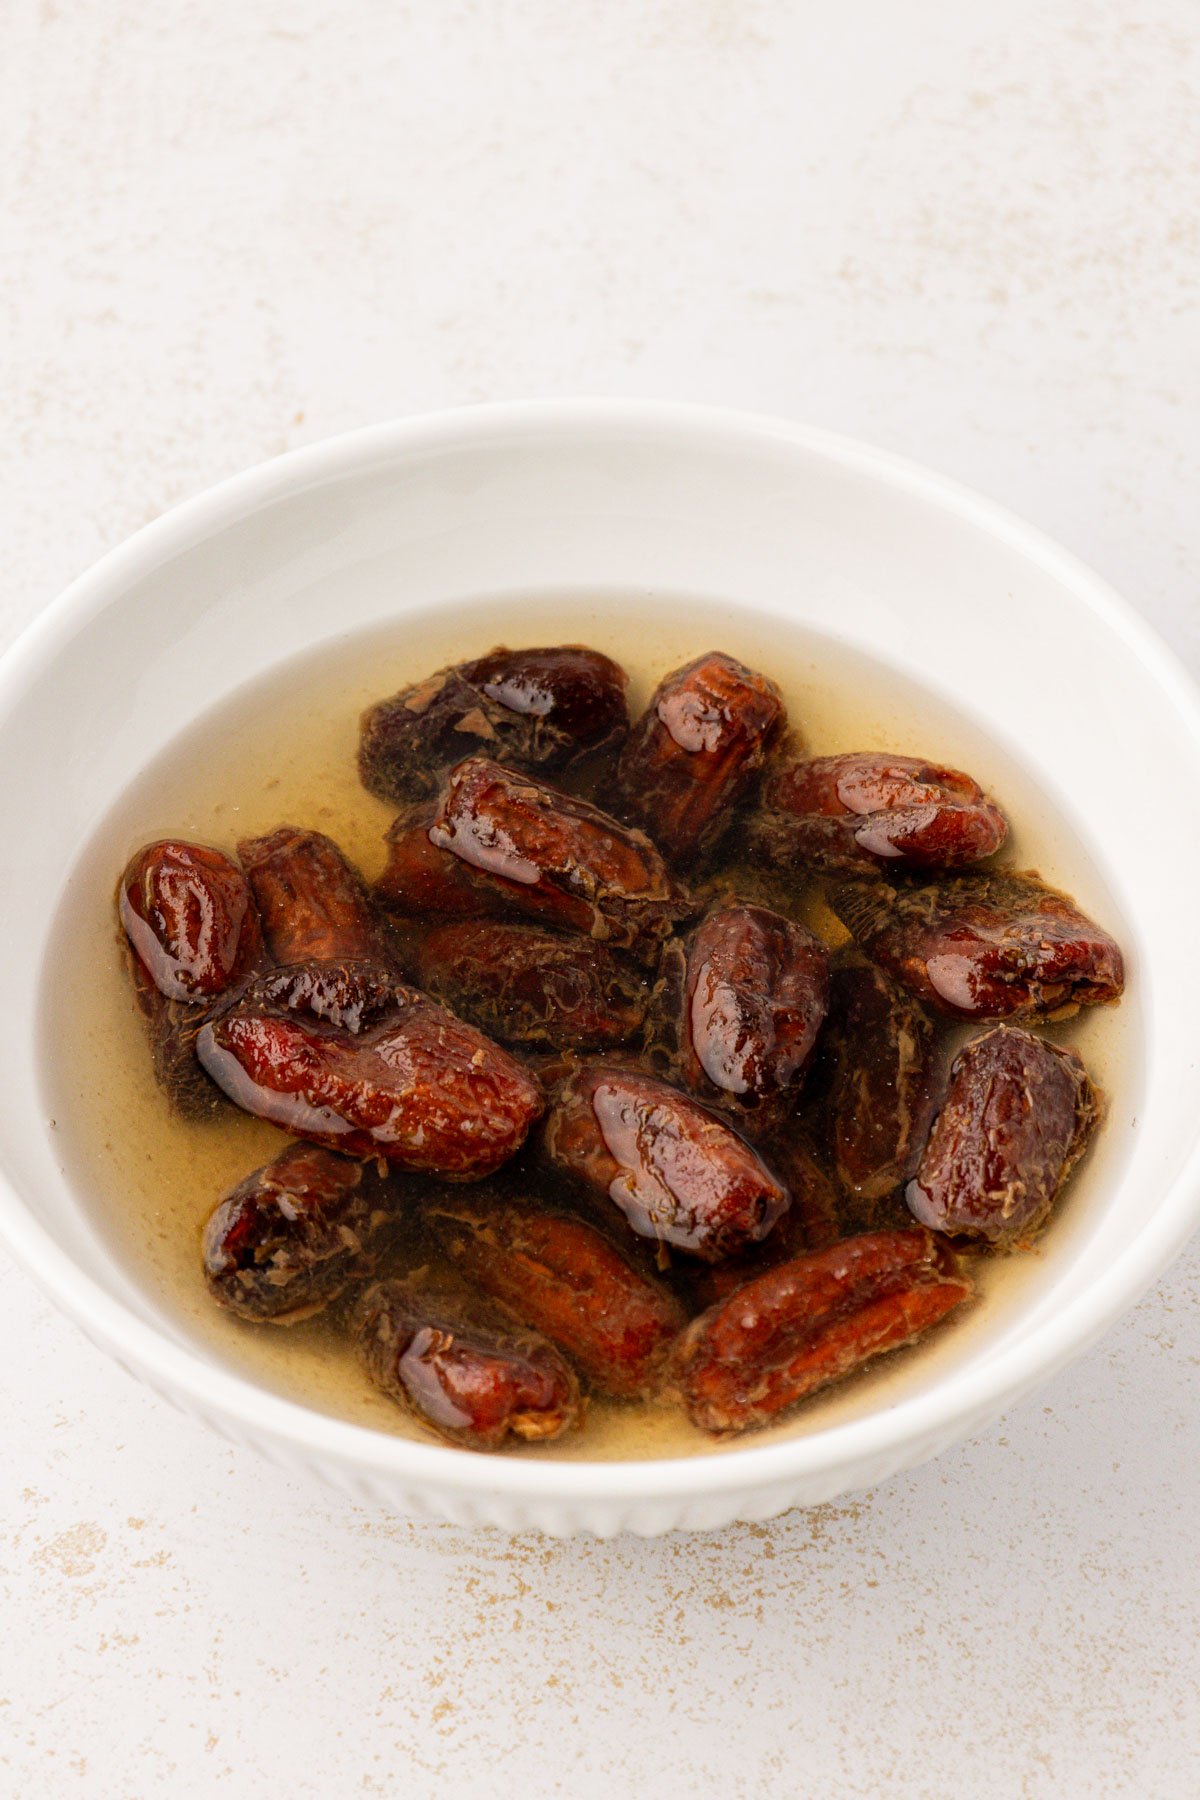 Dates soaking in a bowl of hot water.